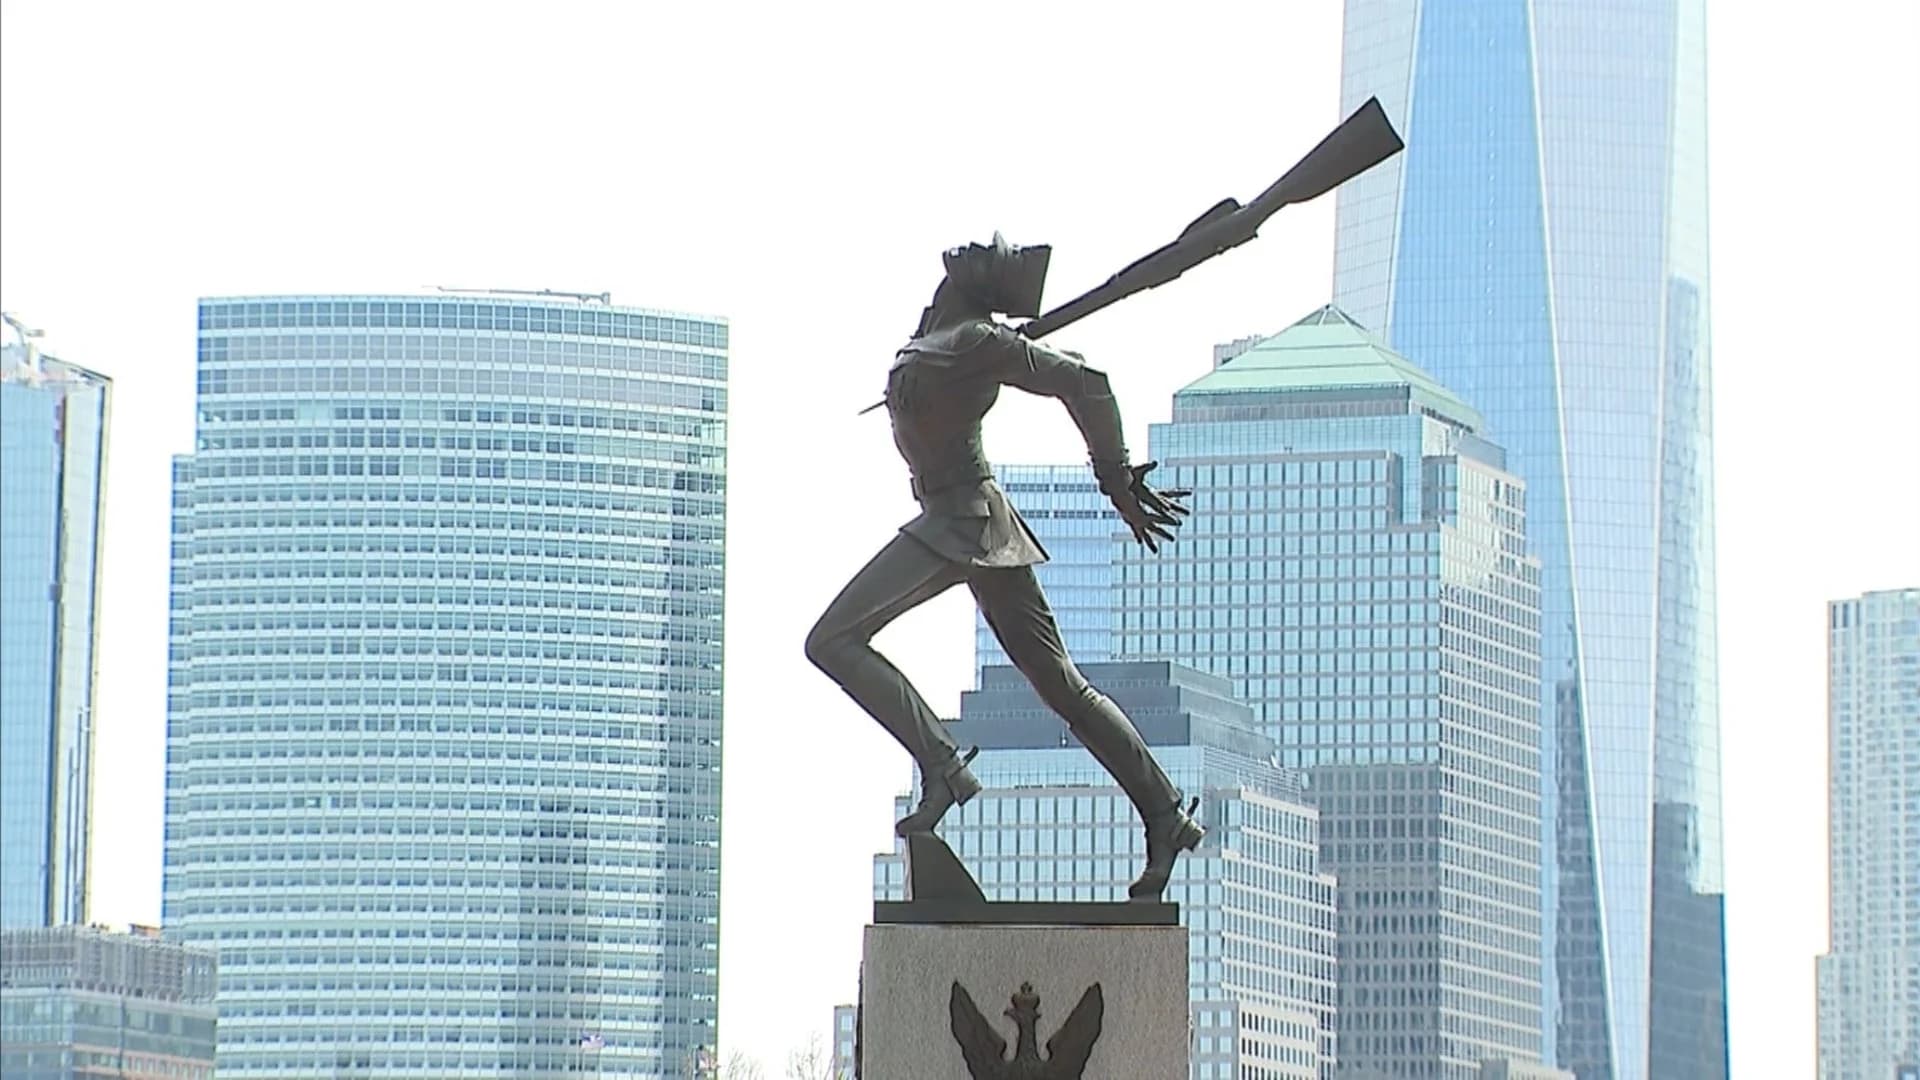 Jersey City Mayor Fulop announces new location of Polish WWII statue